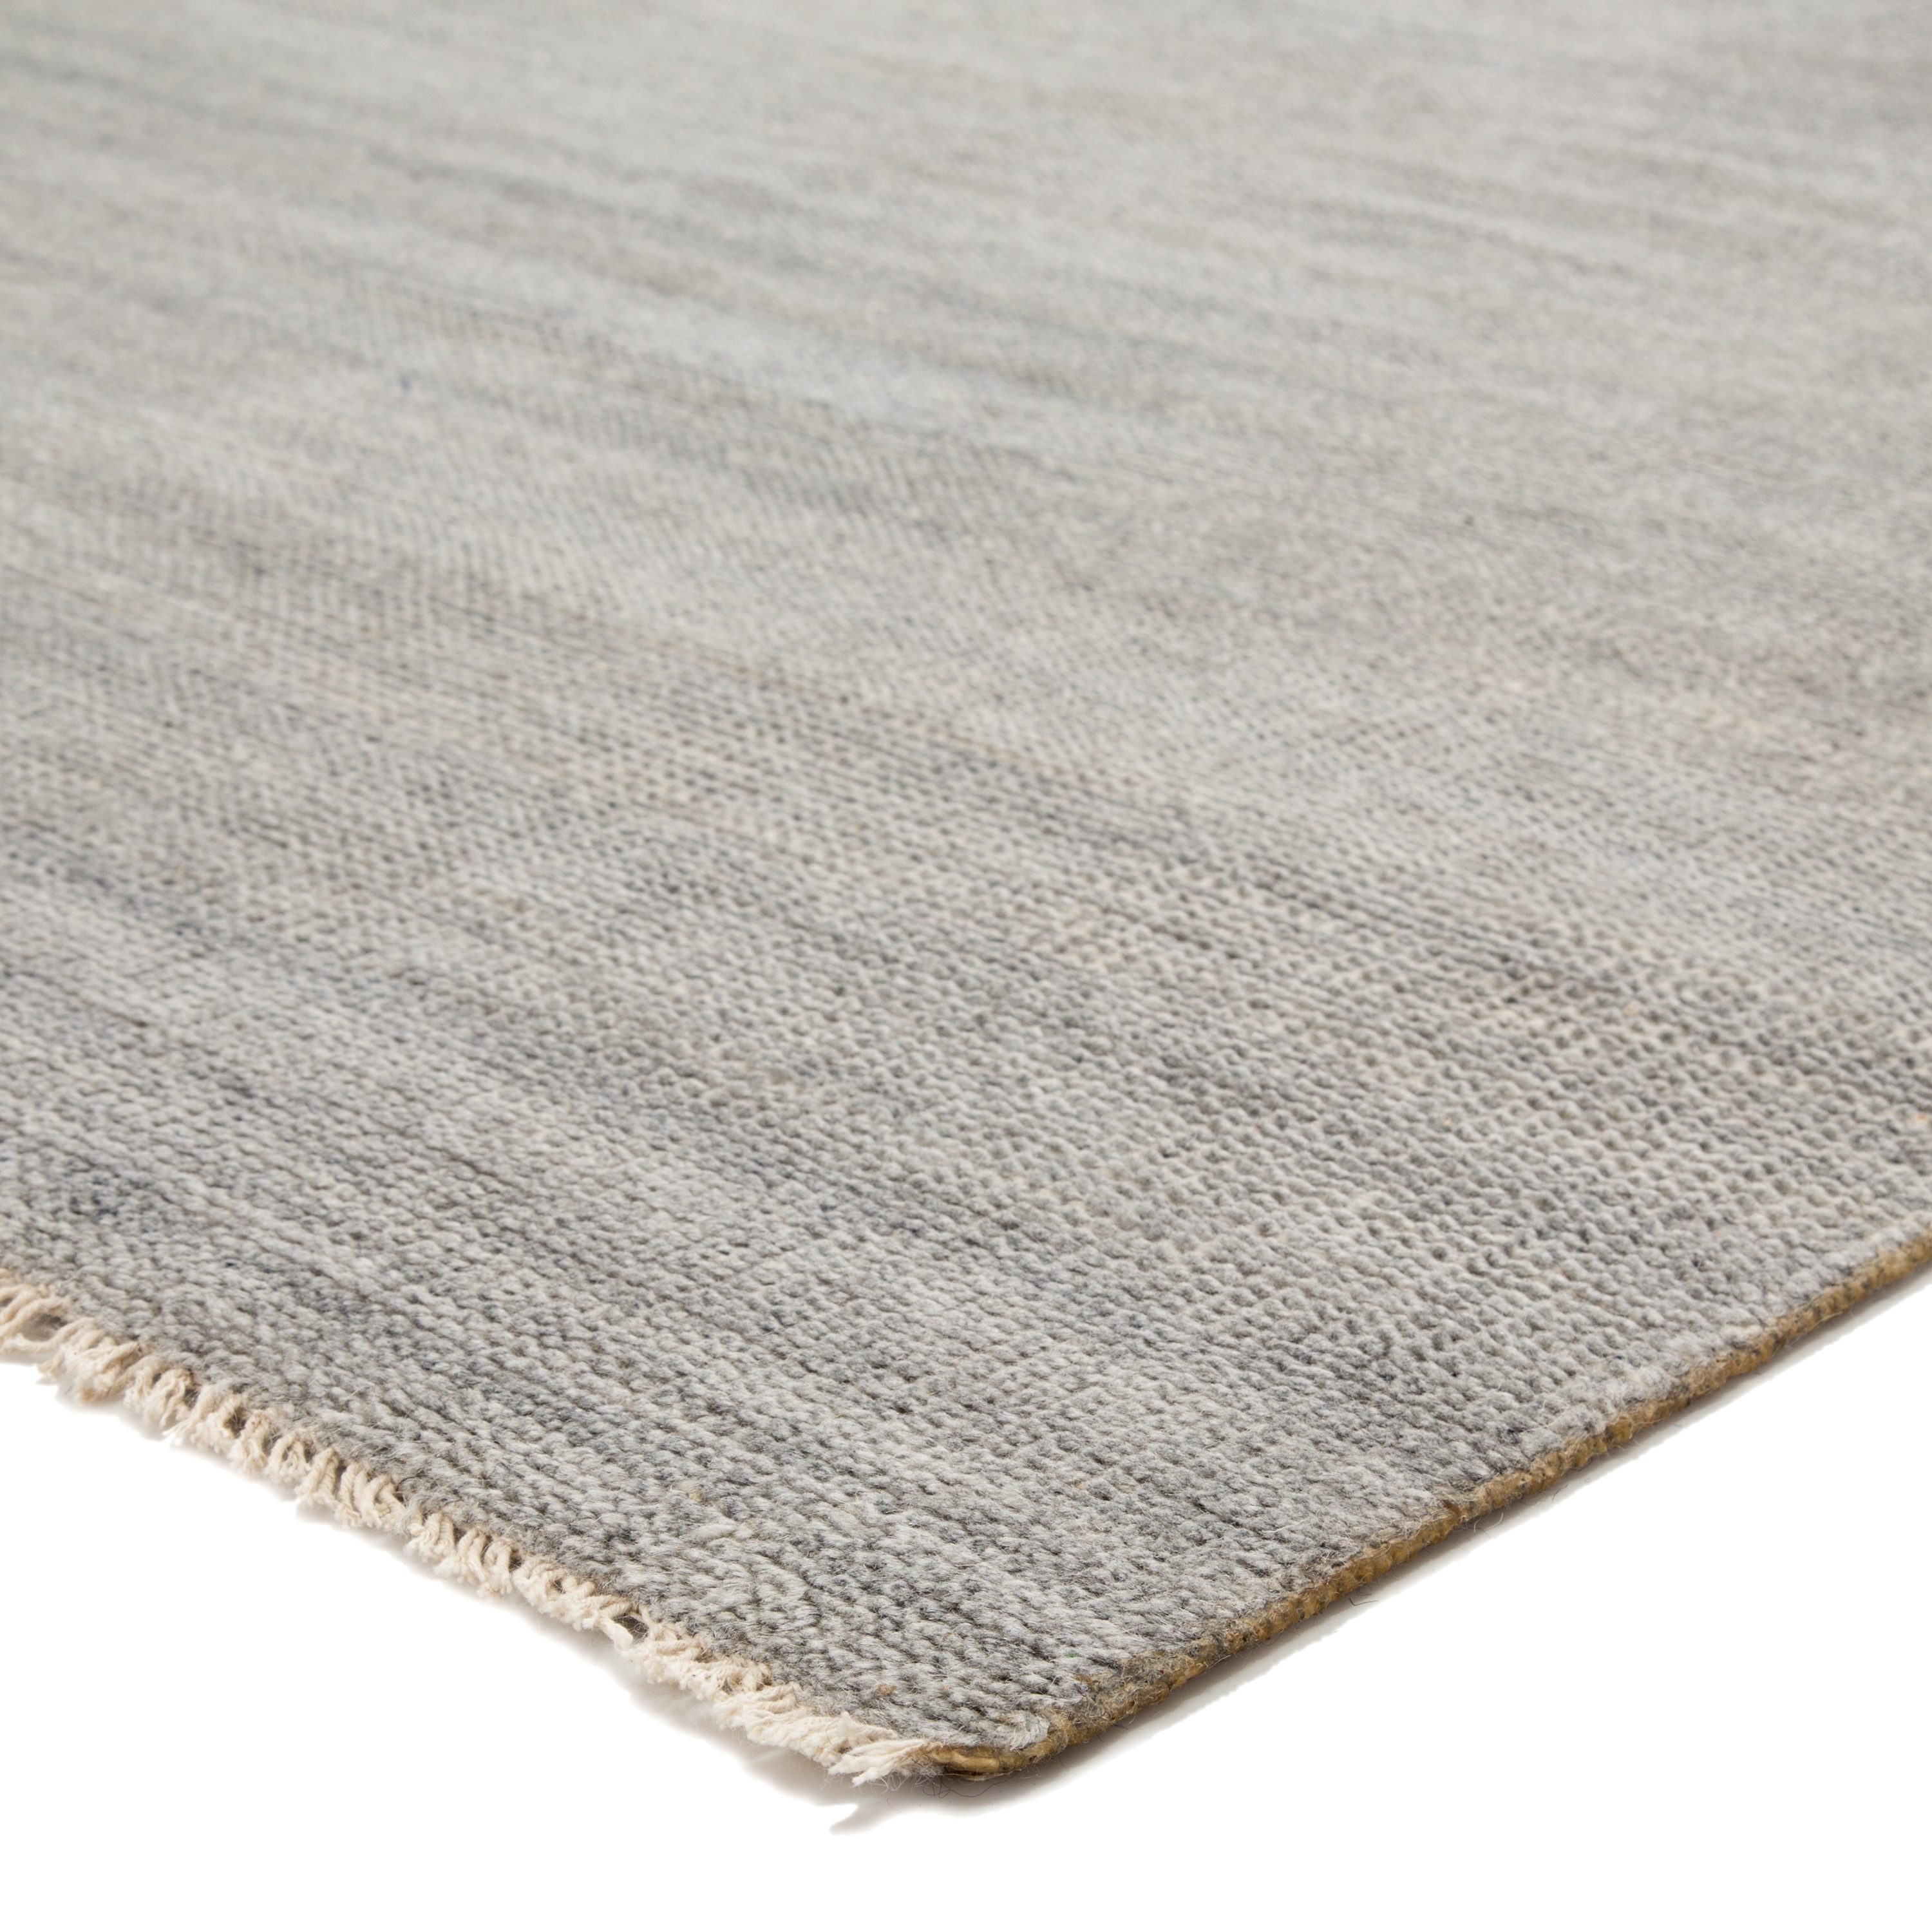 Origin Hand-Knotted Solid Light Gray Area Rug (10'X14') - Image 1